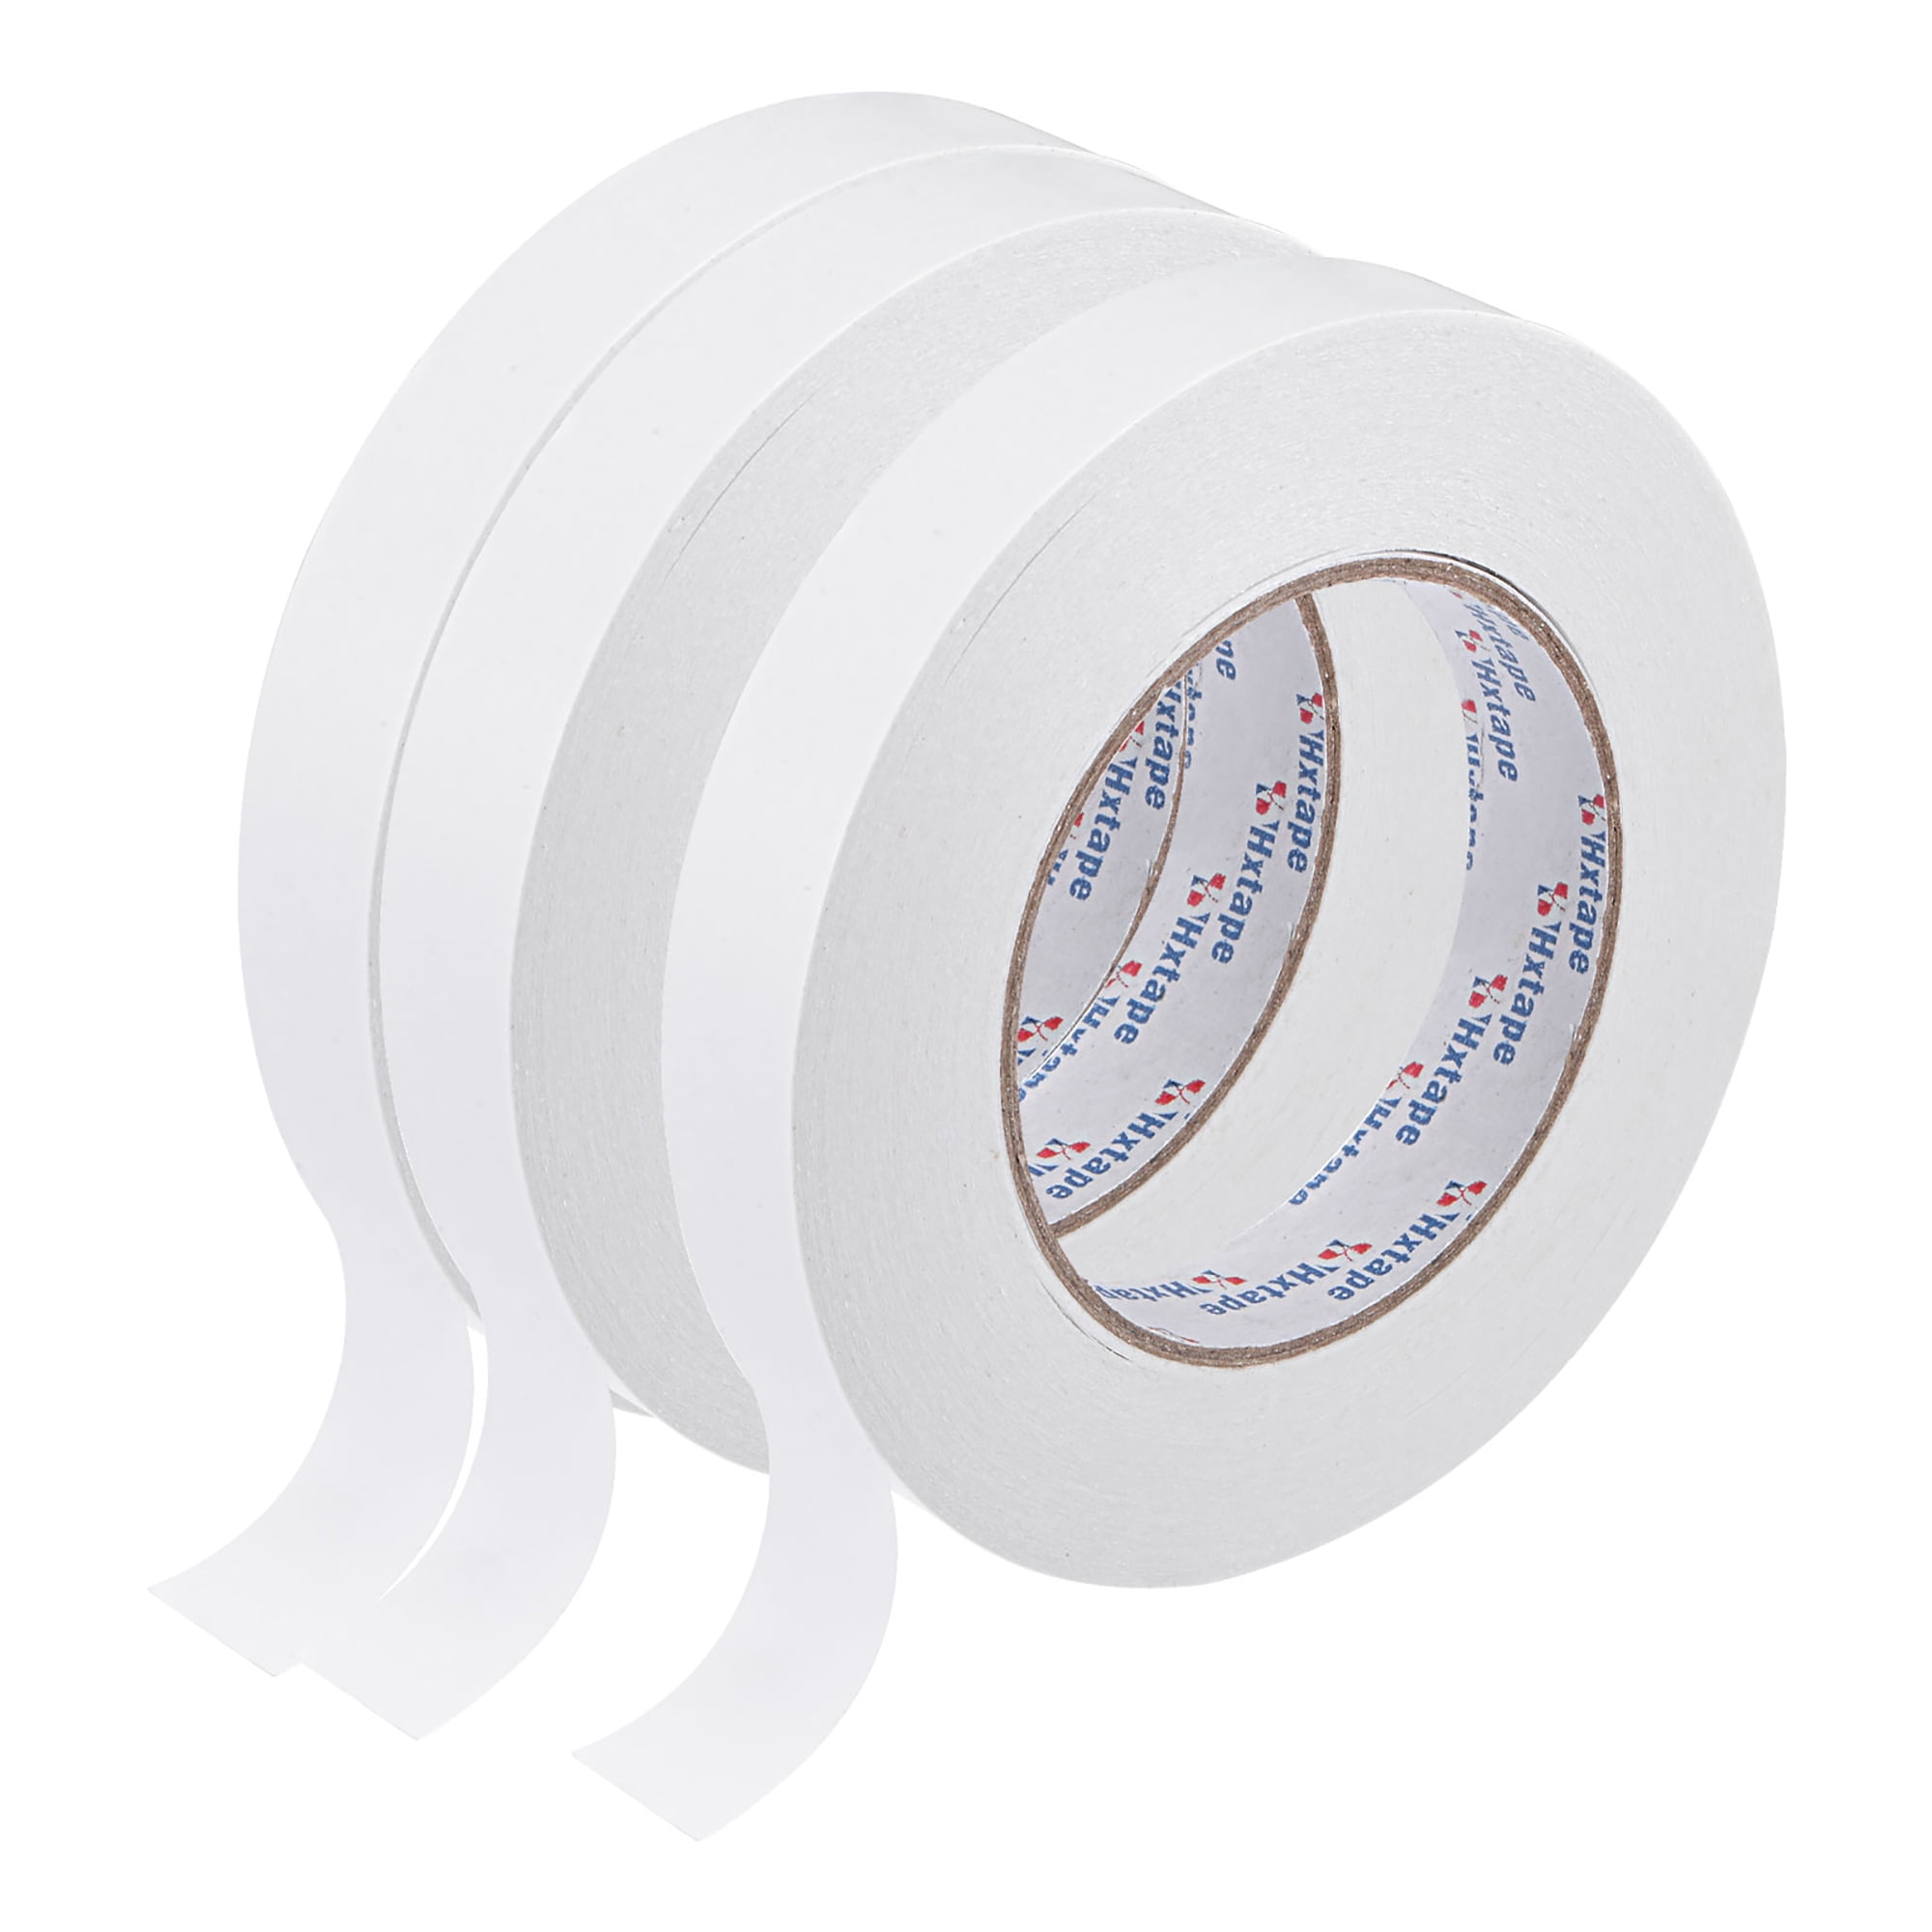 3 Roll 15mm x 30m/98.4ft Double-Sided Adhesive Tape Paper Backing DIY Crafts